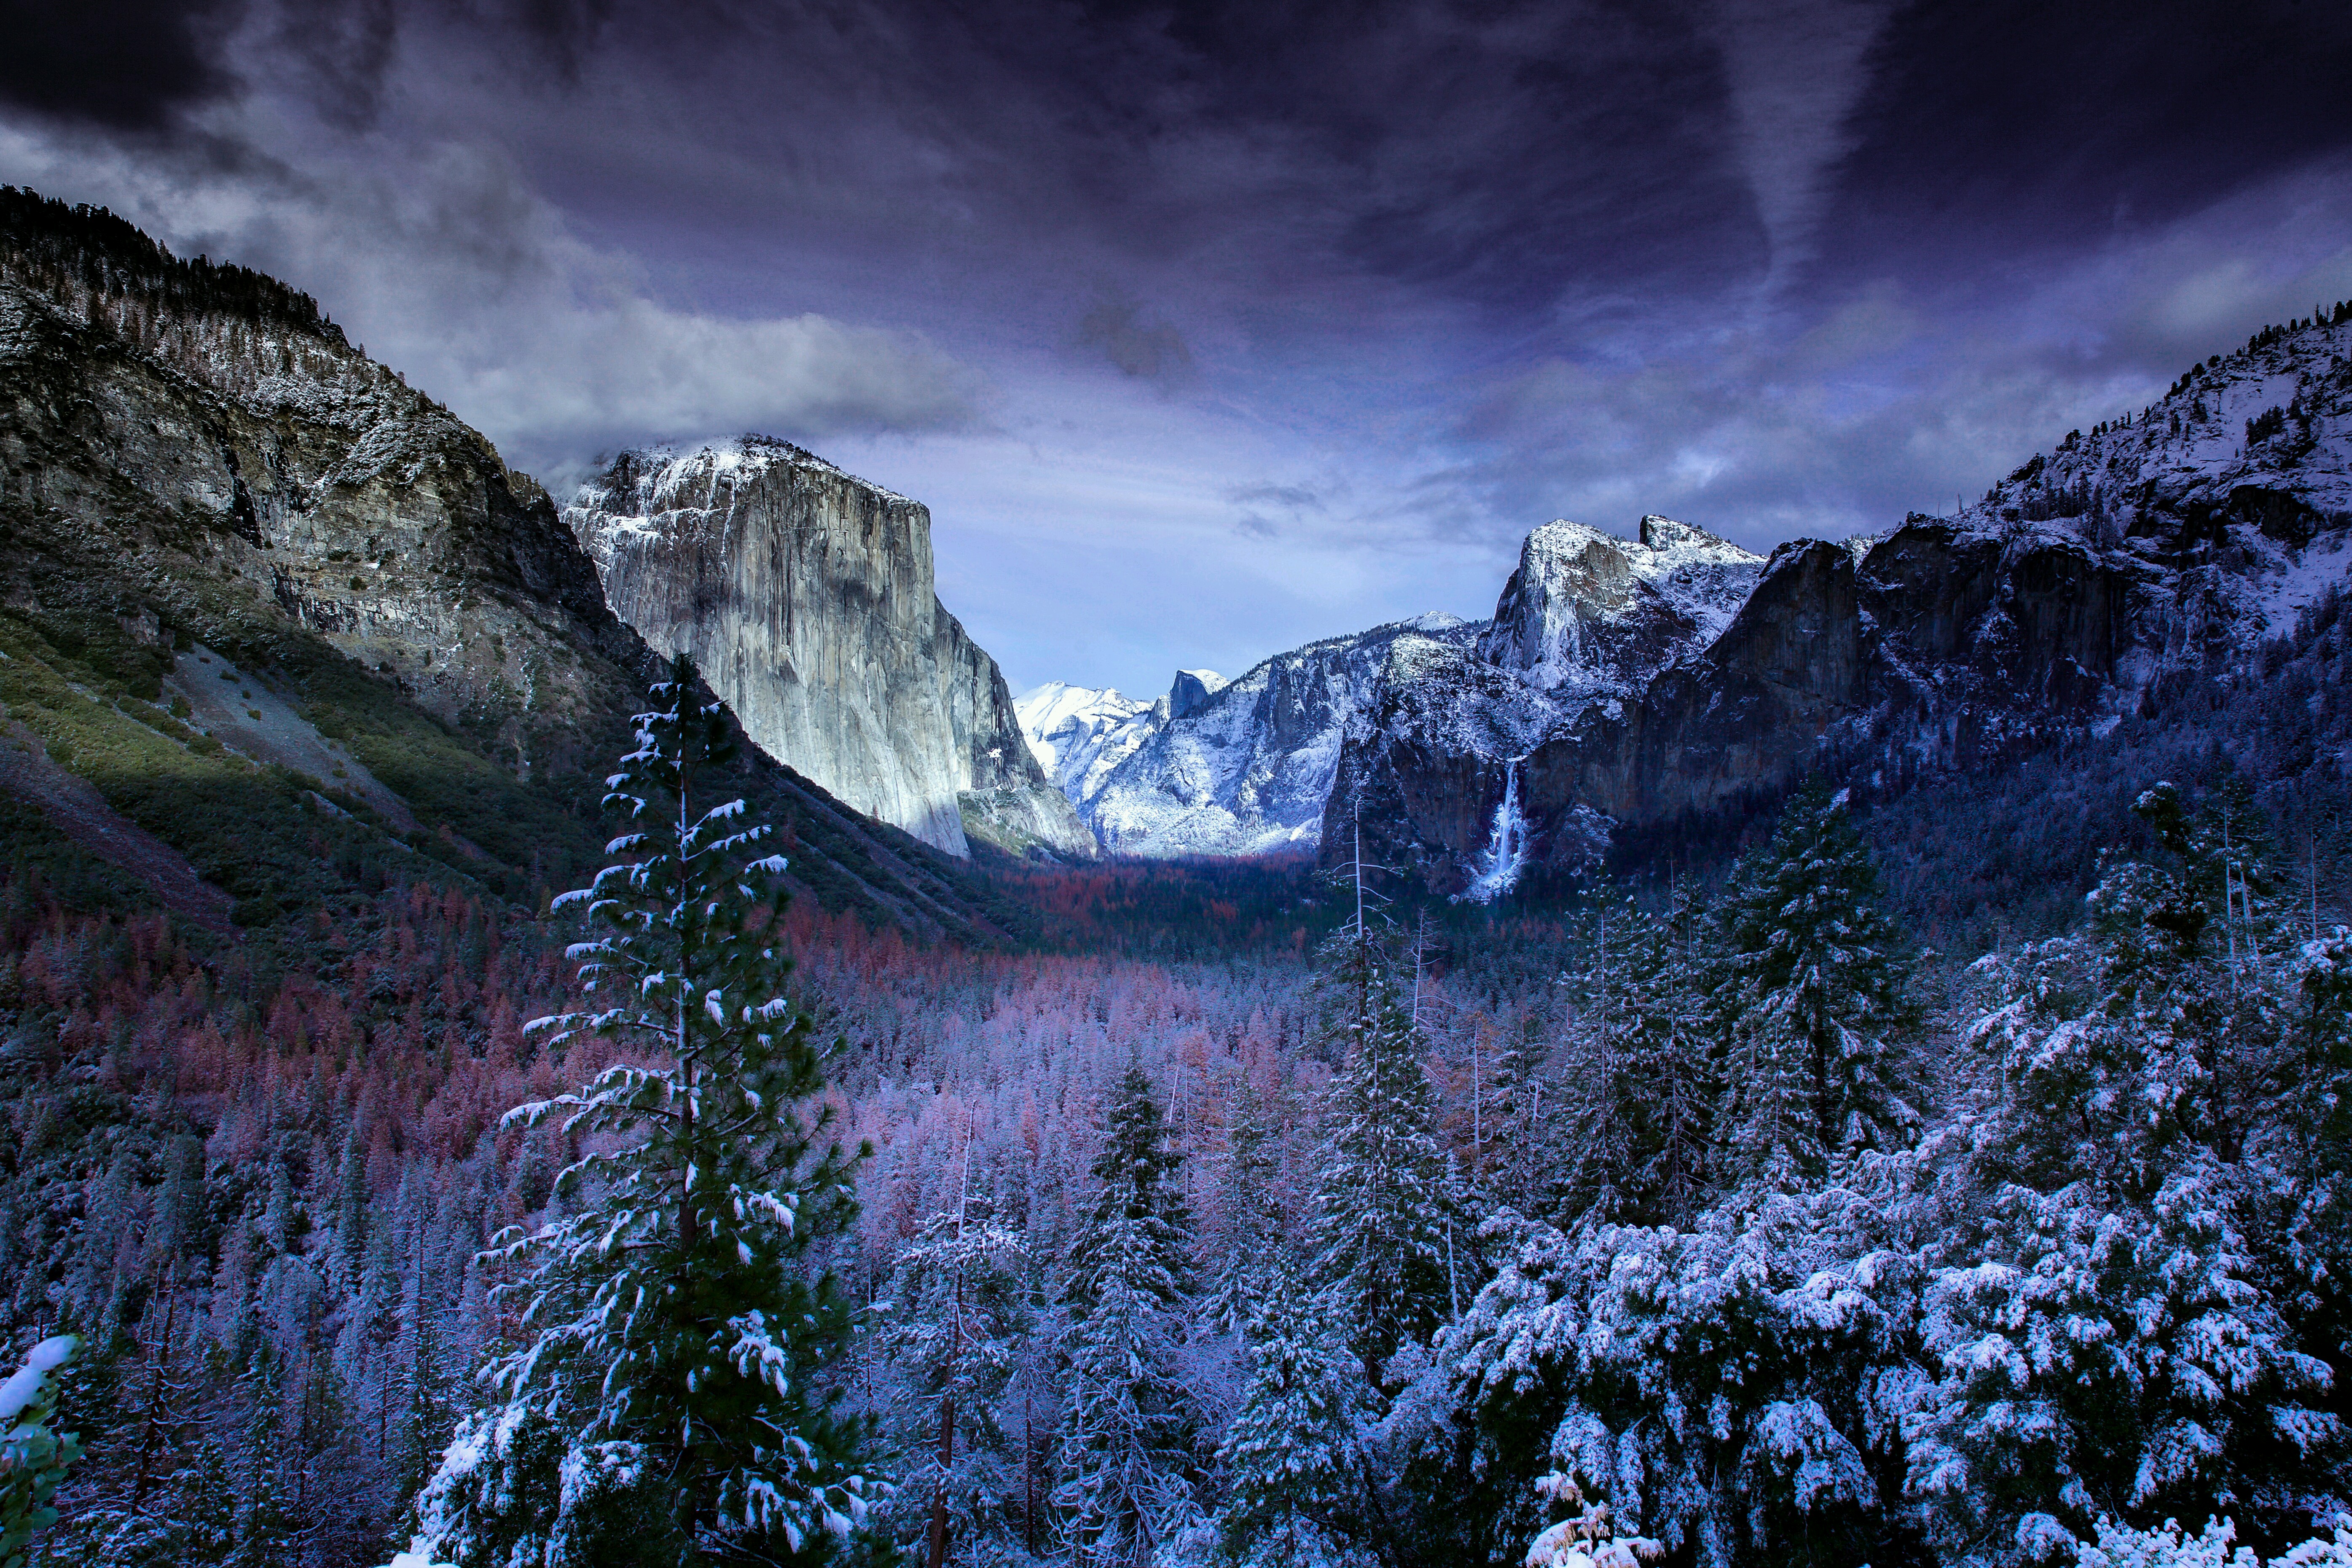 General 5580x3720 mountains mountain pass winter photography nature forest plants landscape